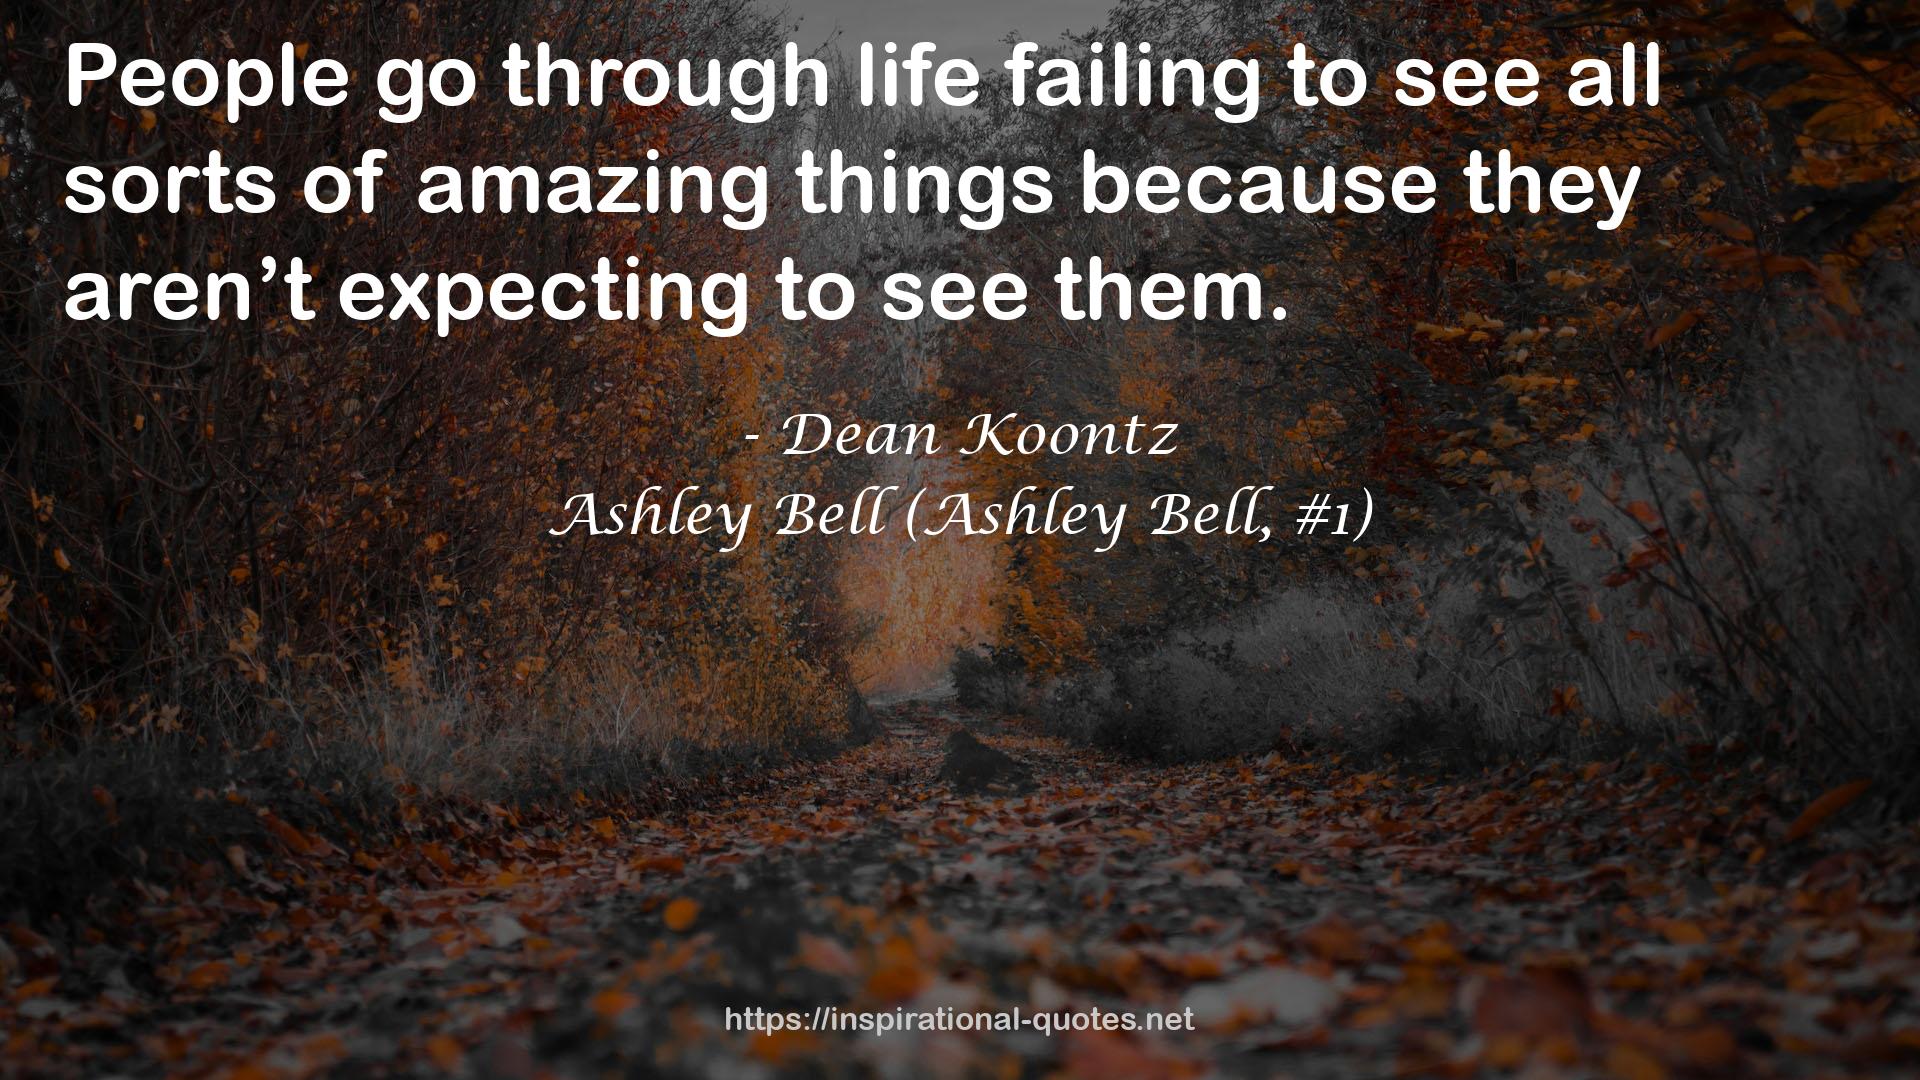 Ashley Bell (Ashley Bell, #1) QUOTES